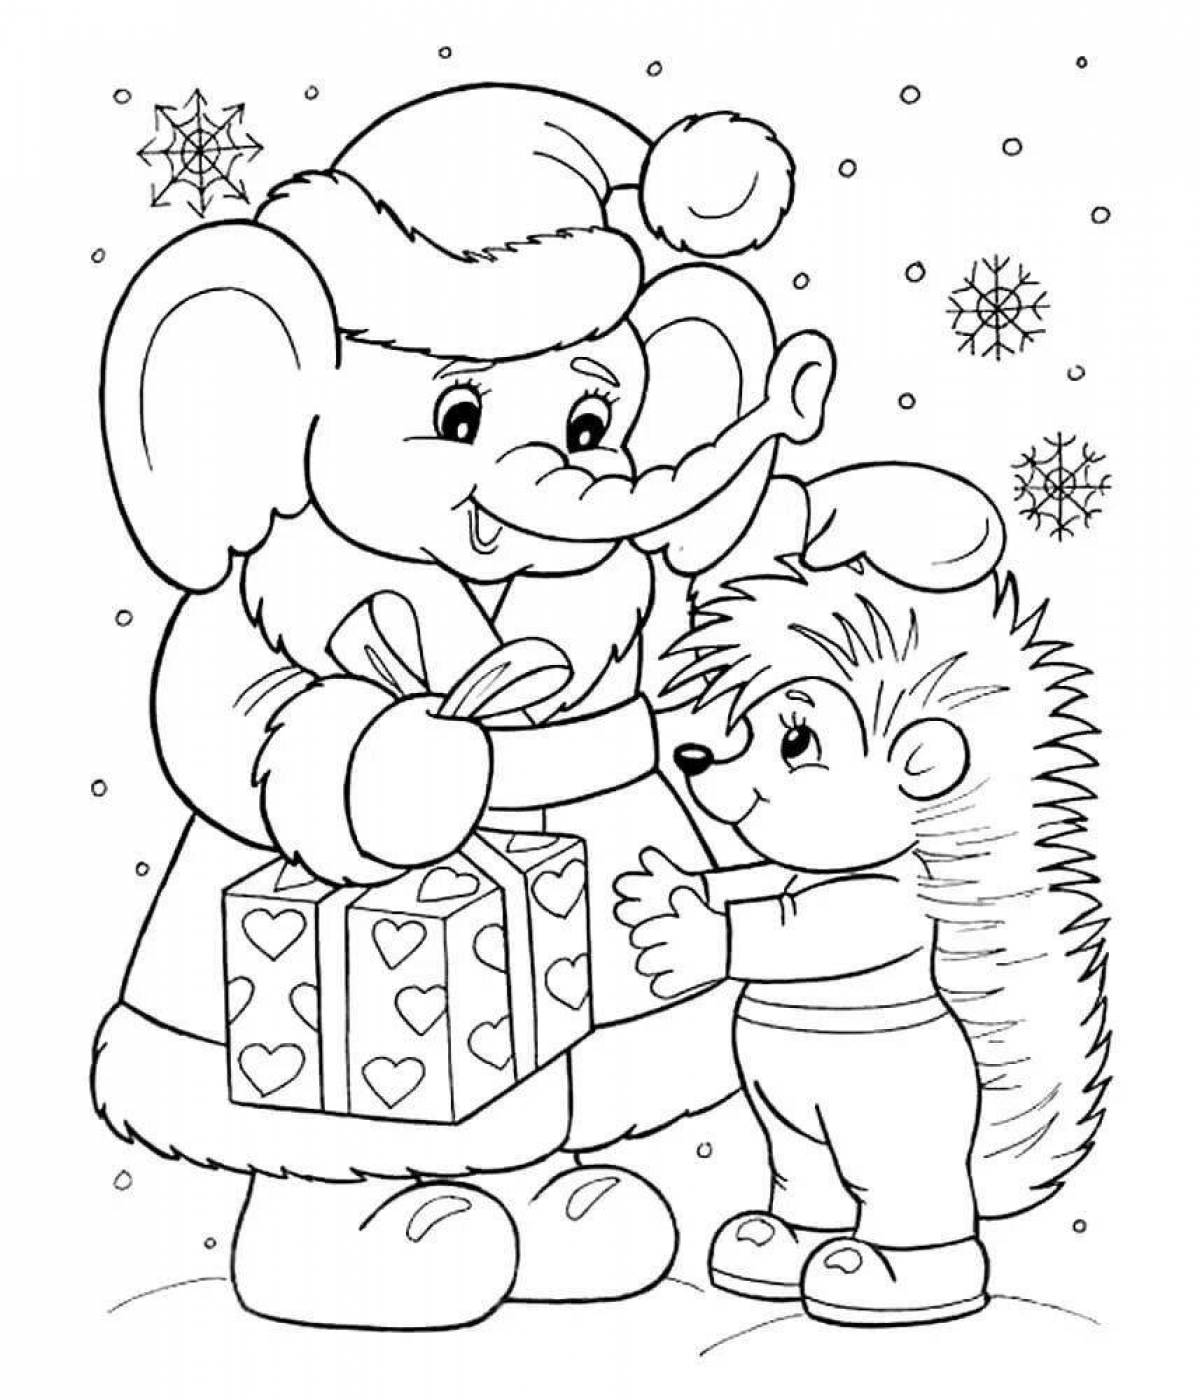 Great children's Christmas coloring book